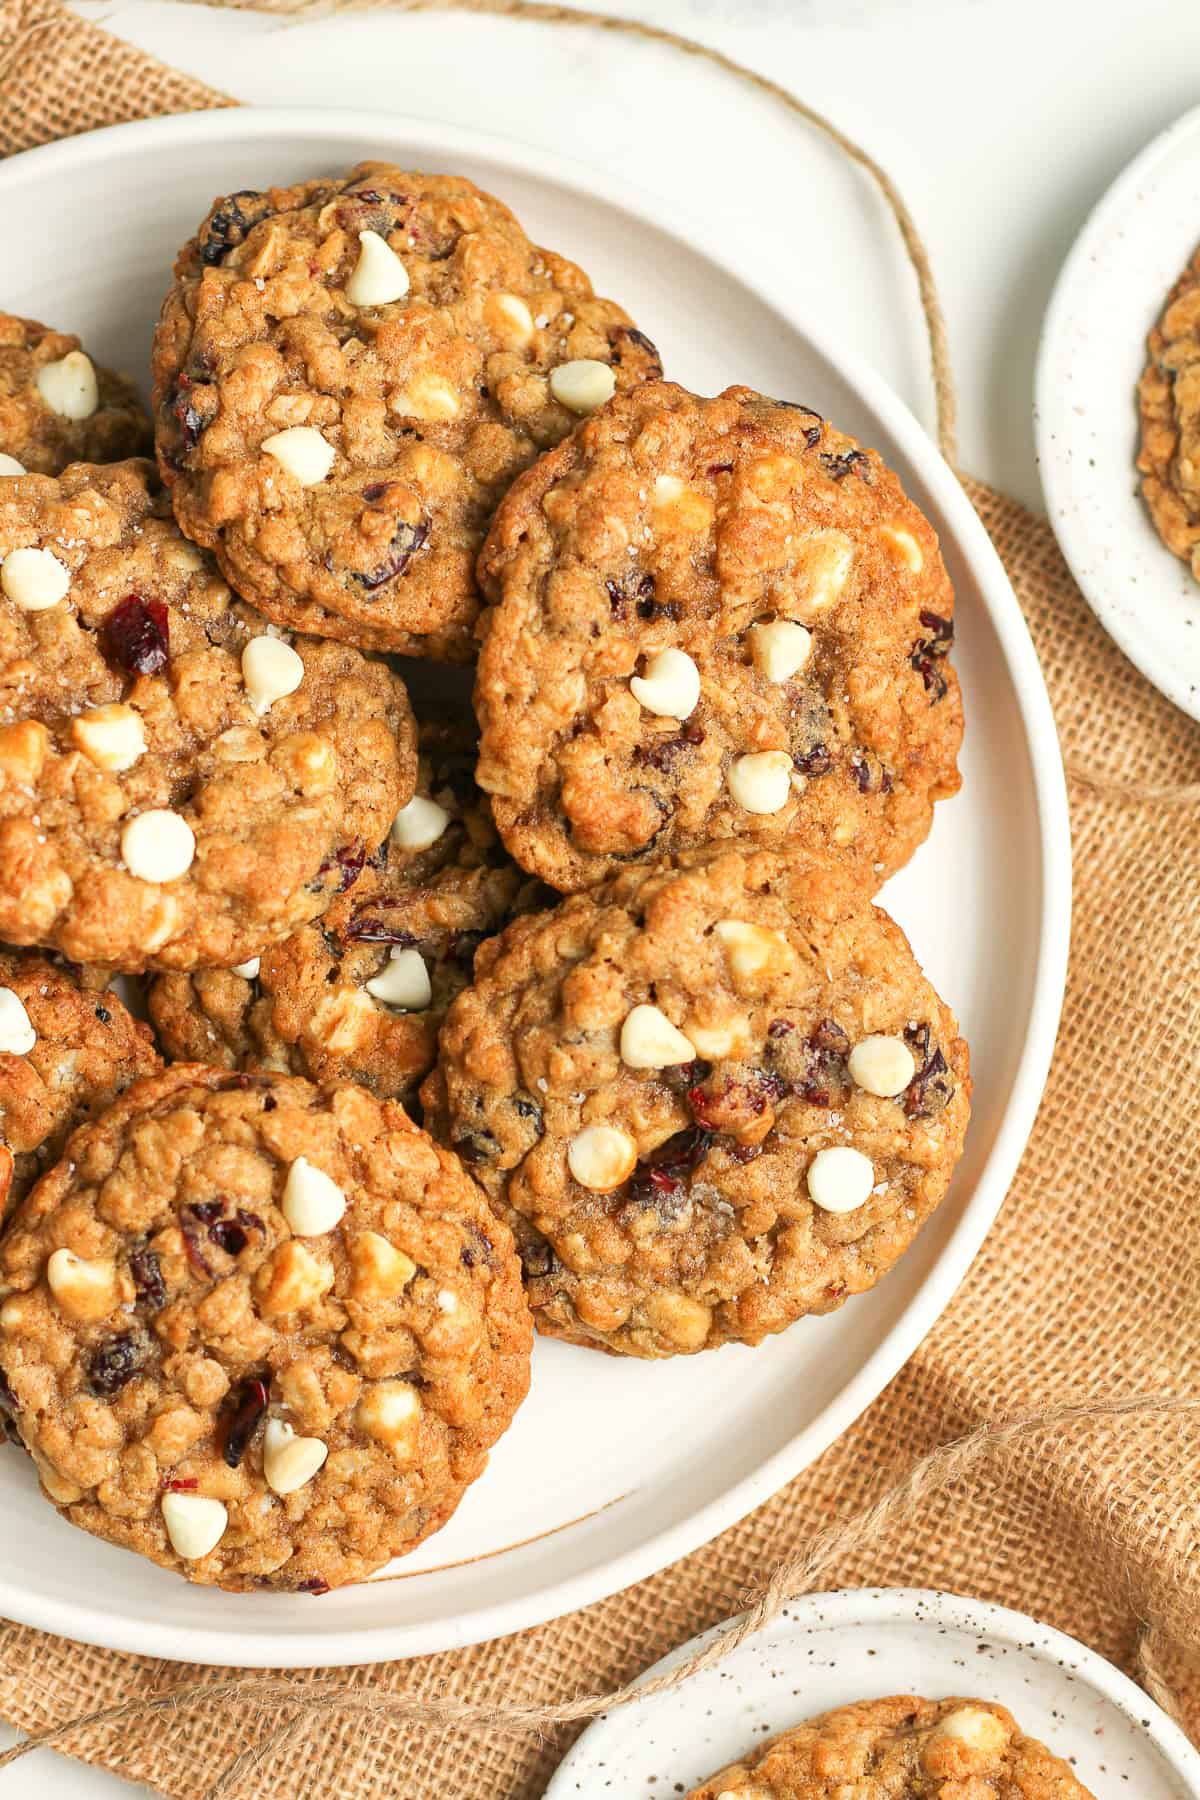 A portion of a plate of baked white chocolate oatmeal cookies with cranberries.